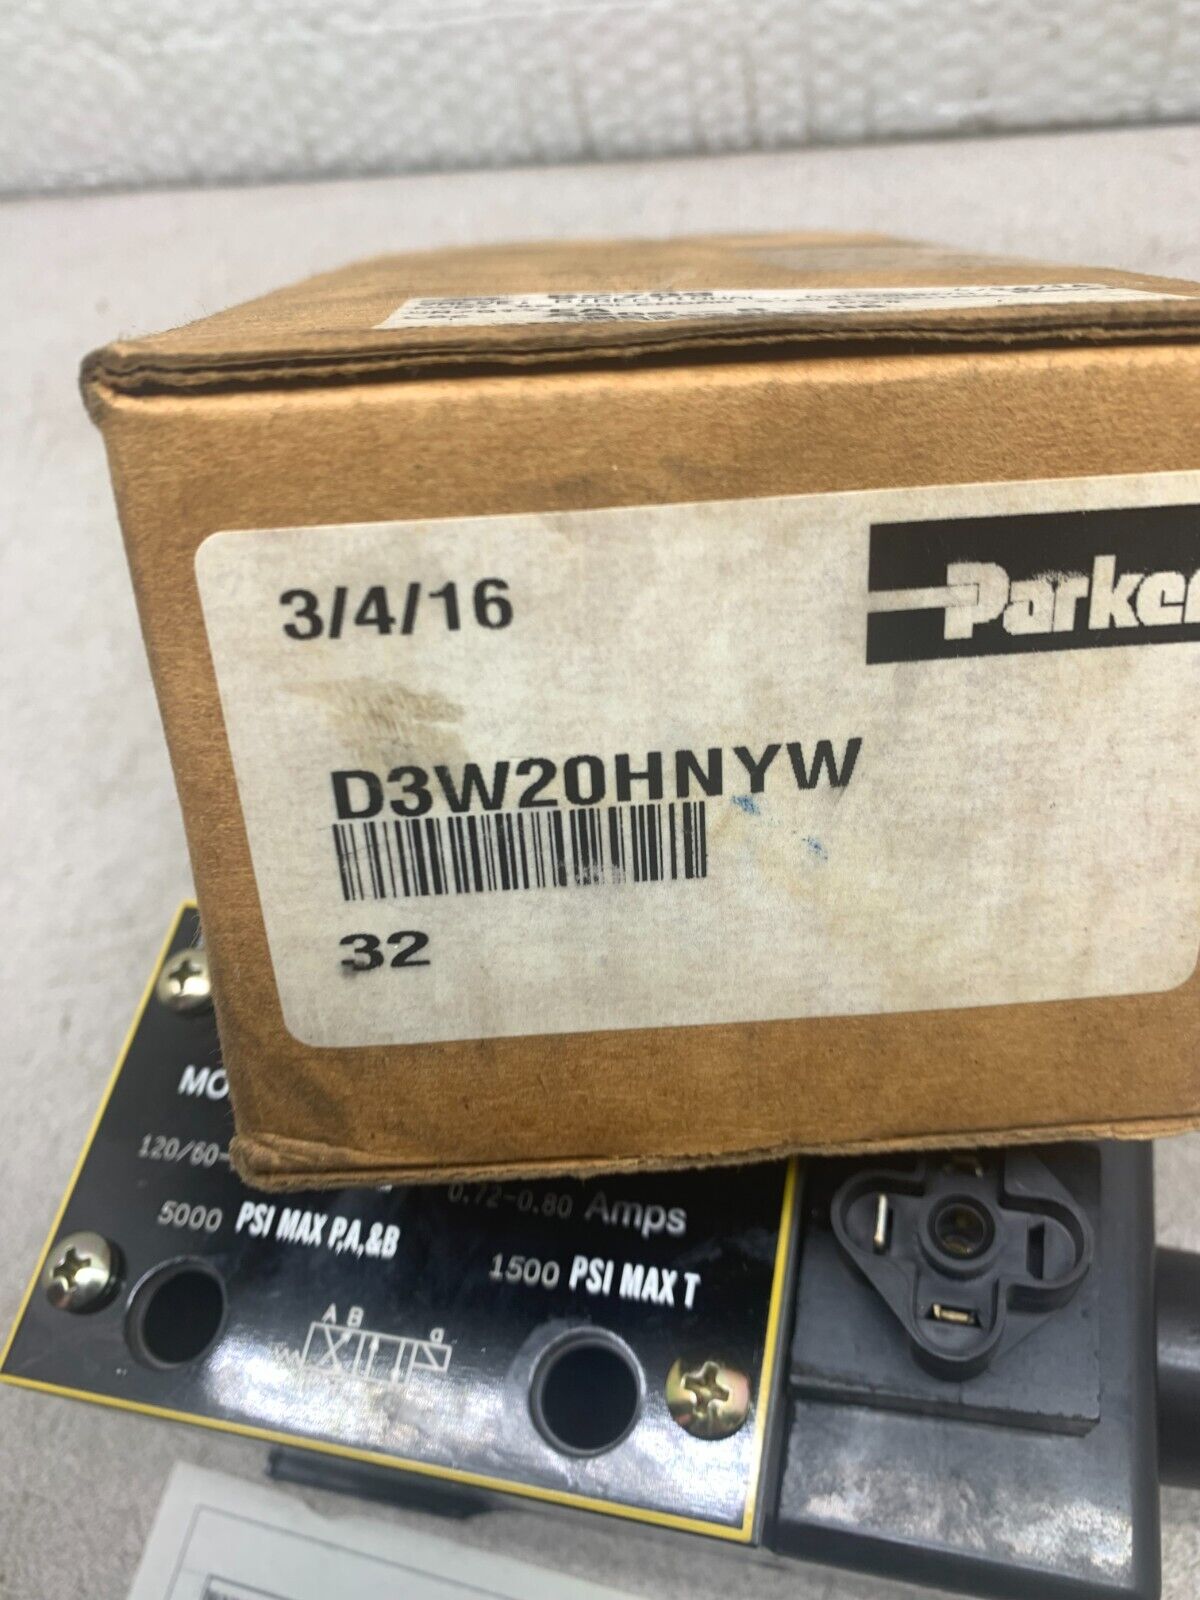 NEW IN BOX PARKER HYDRAULIC SOLENOID CONTROL VALVE 110/120V. COIL D3W20HNYW 32